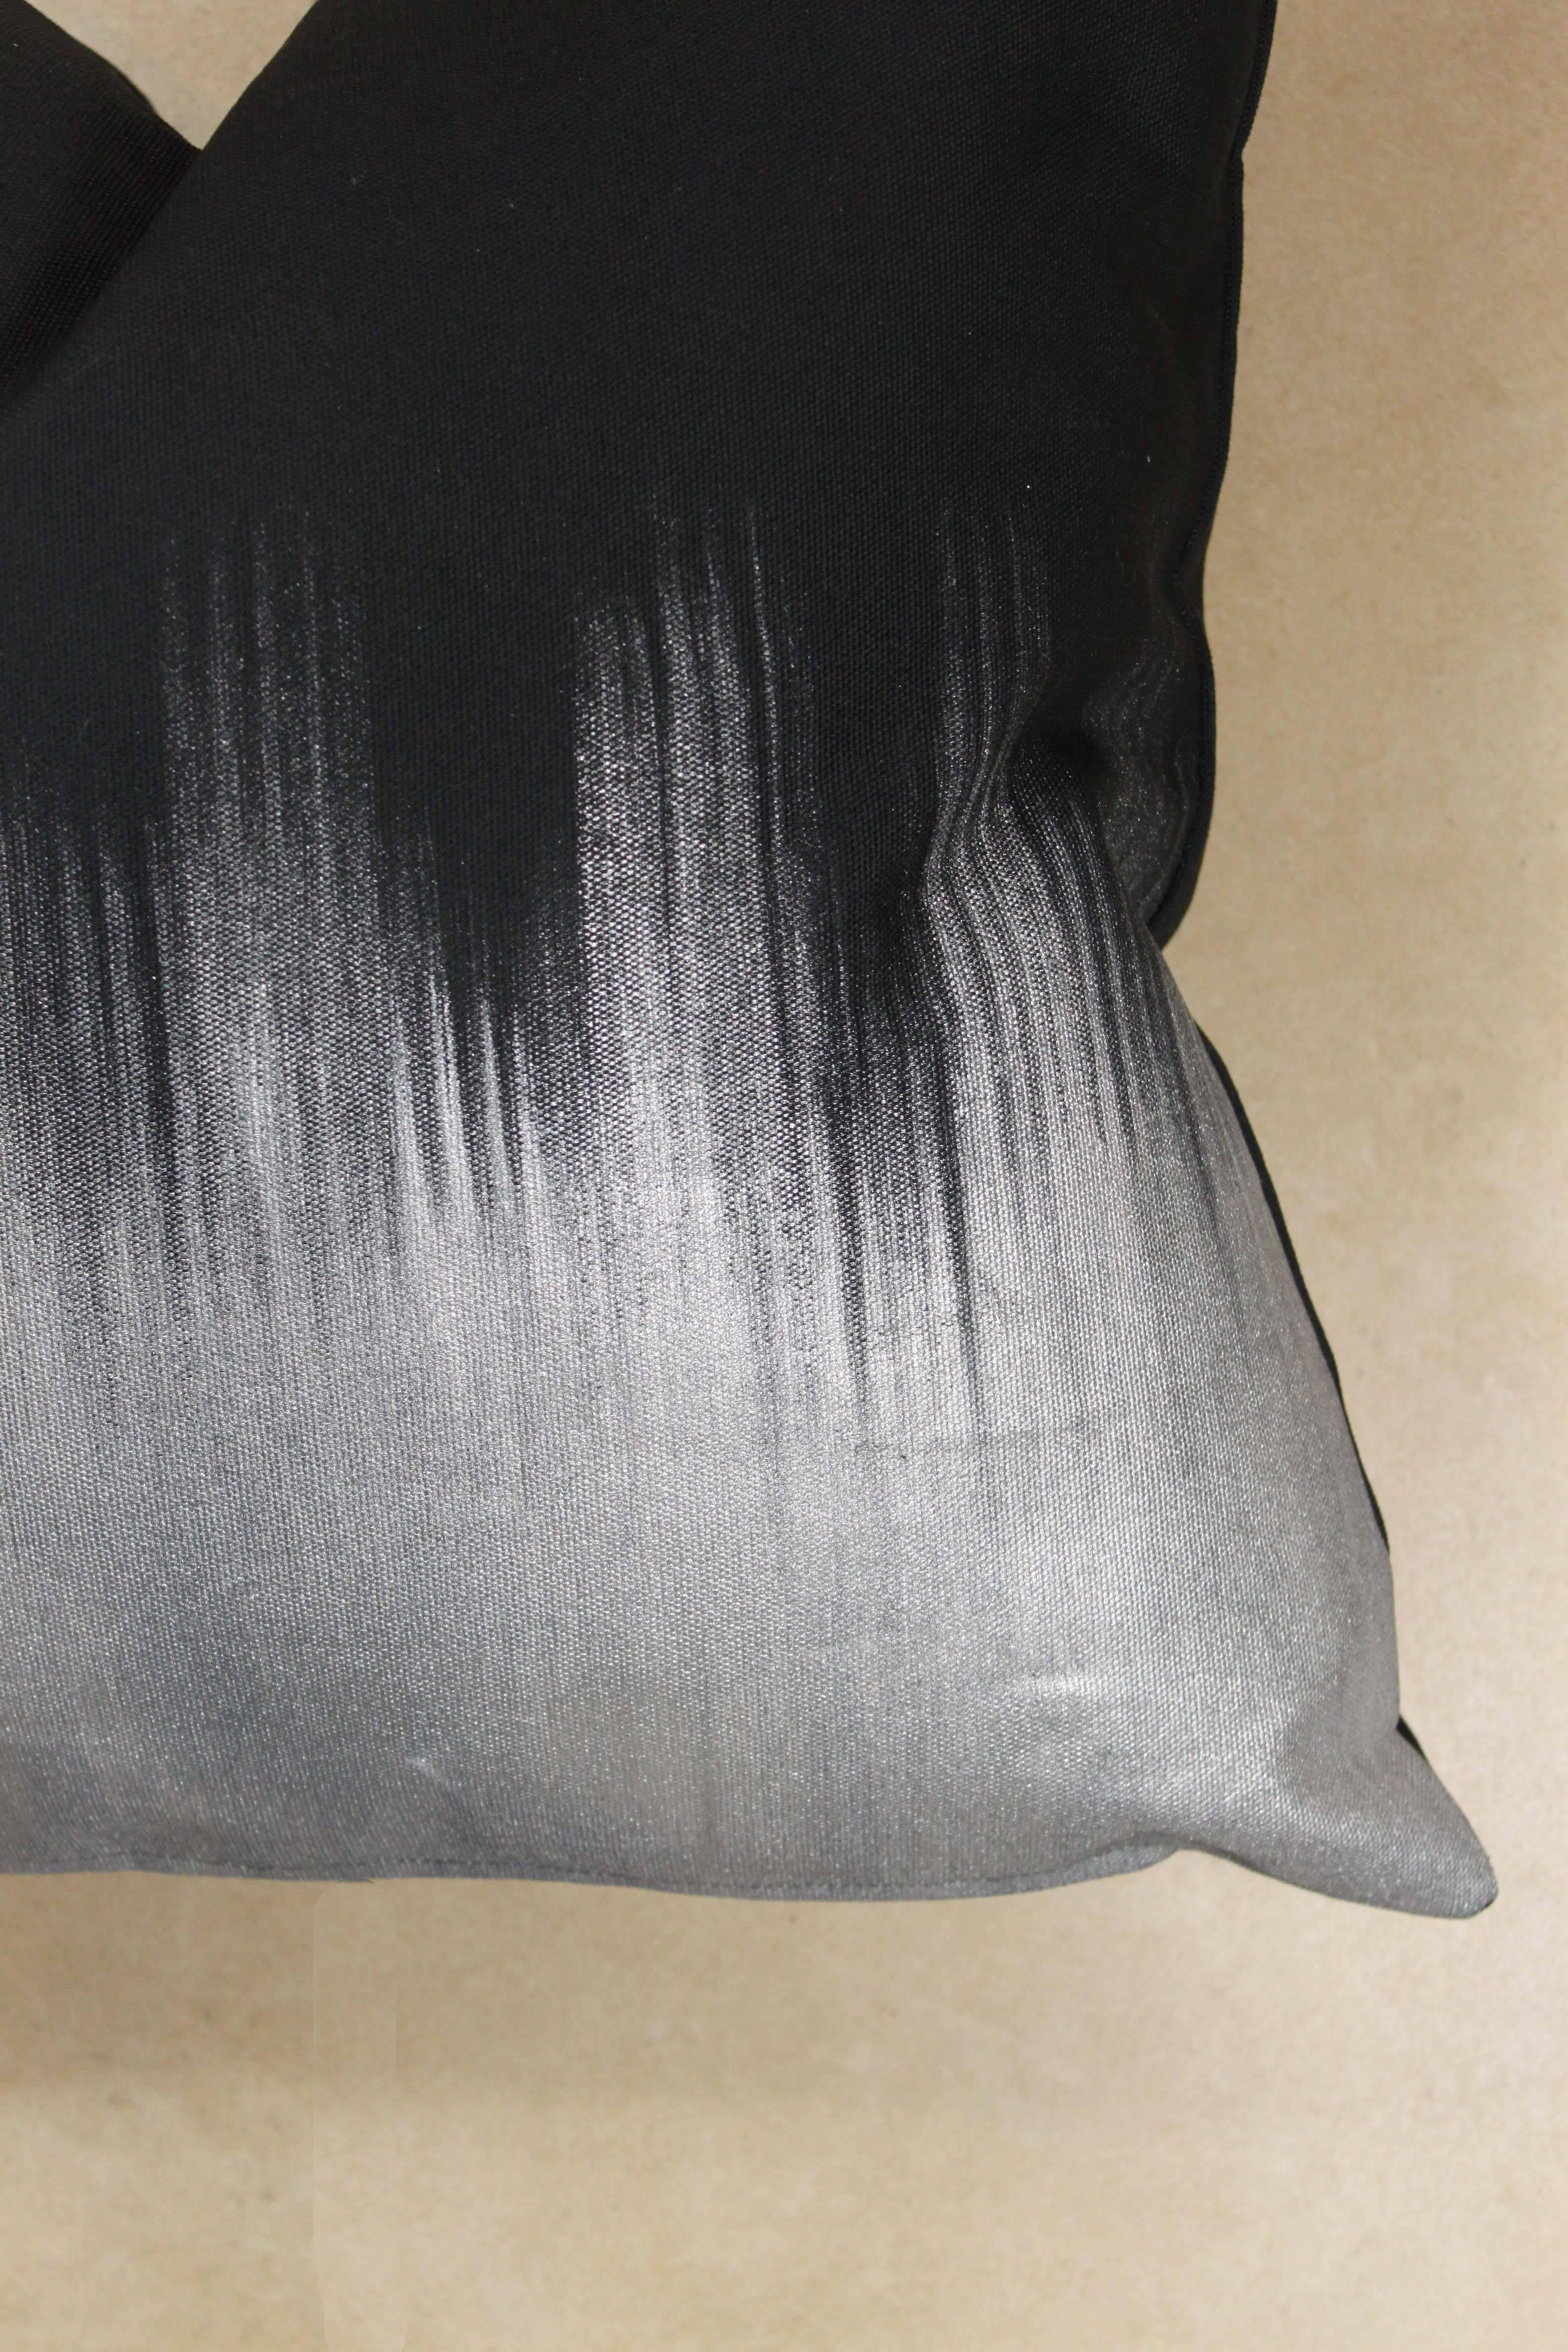 Canadian Silver Ombre Alloy Pillow by Amanda Hamilton For Sale